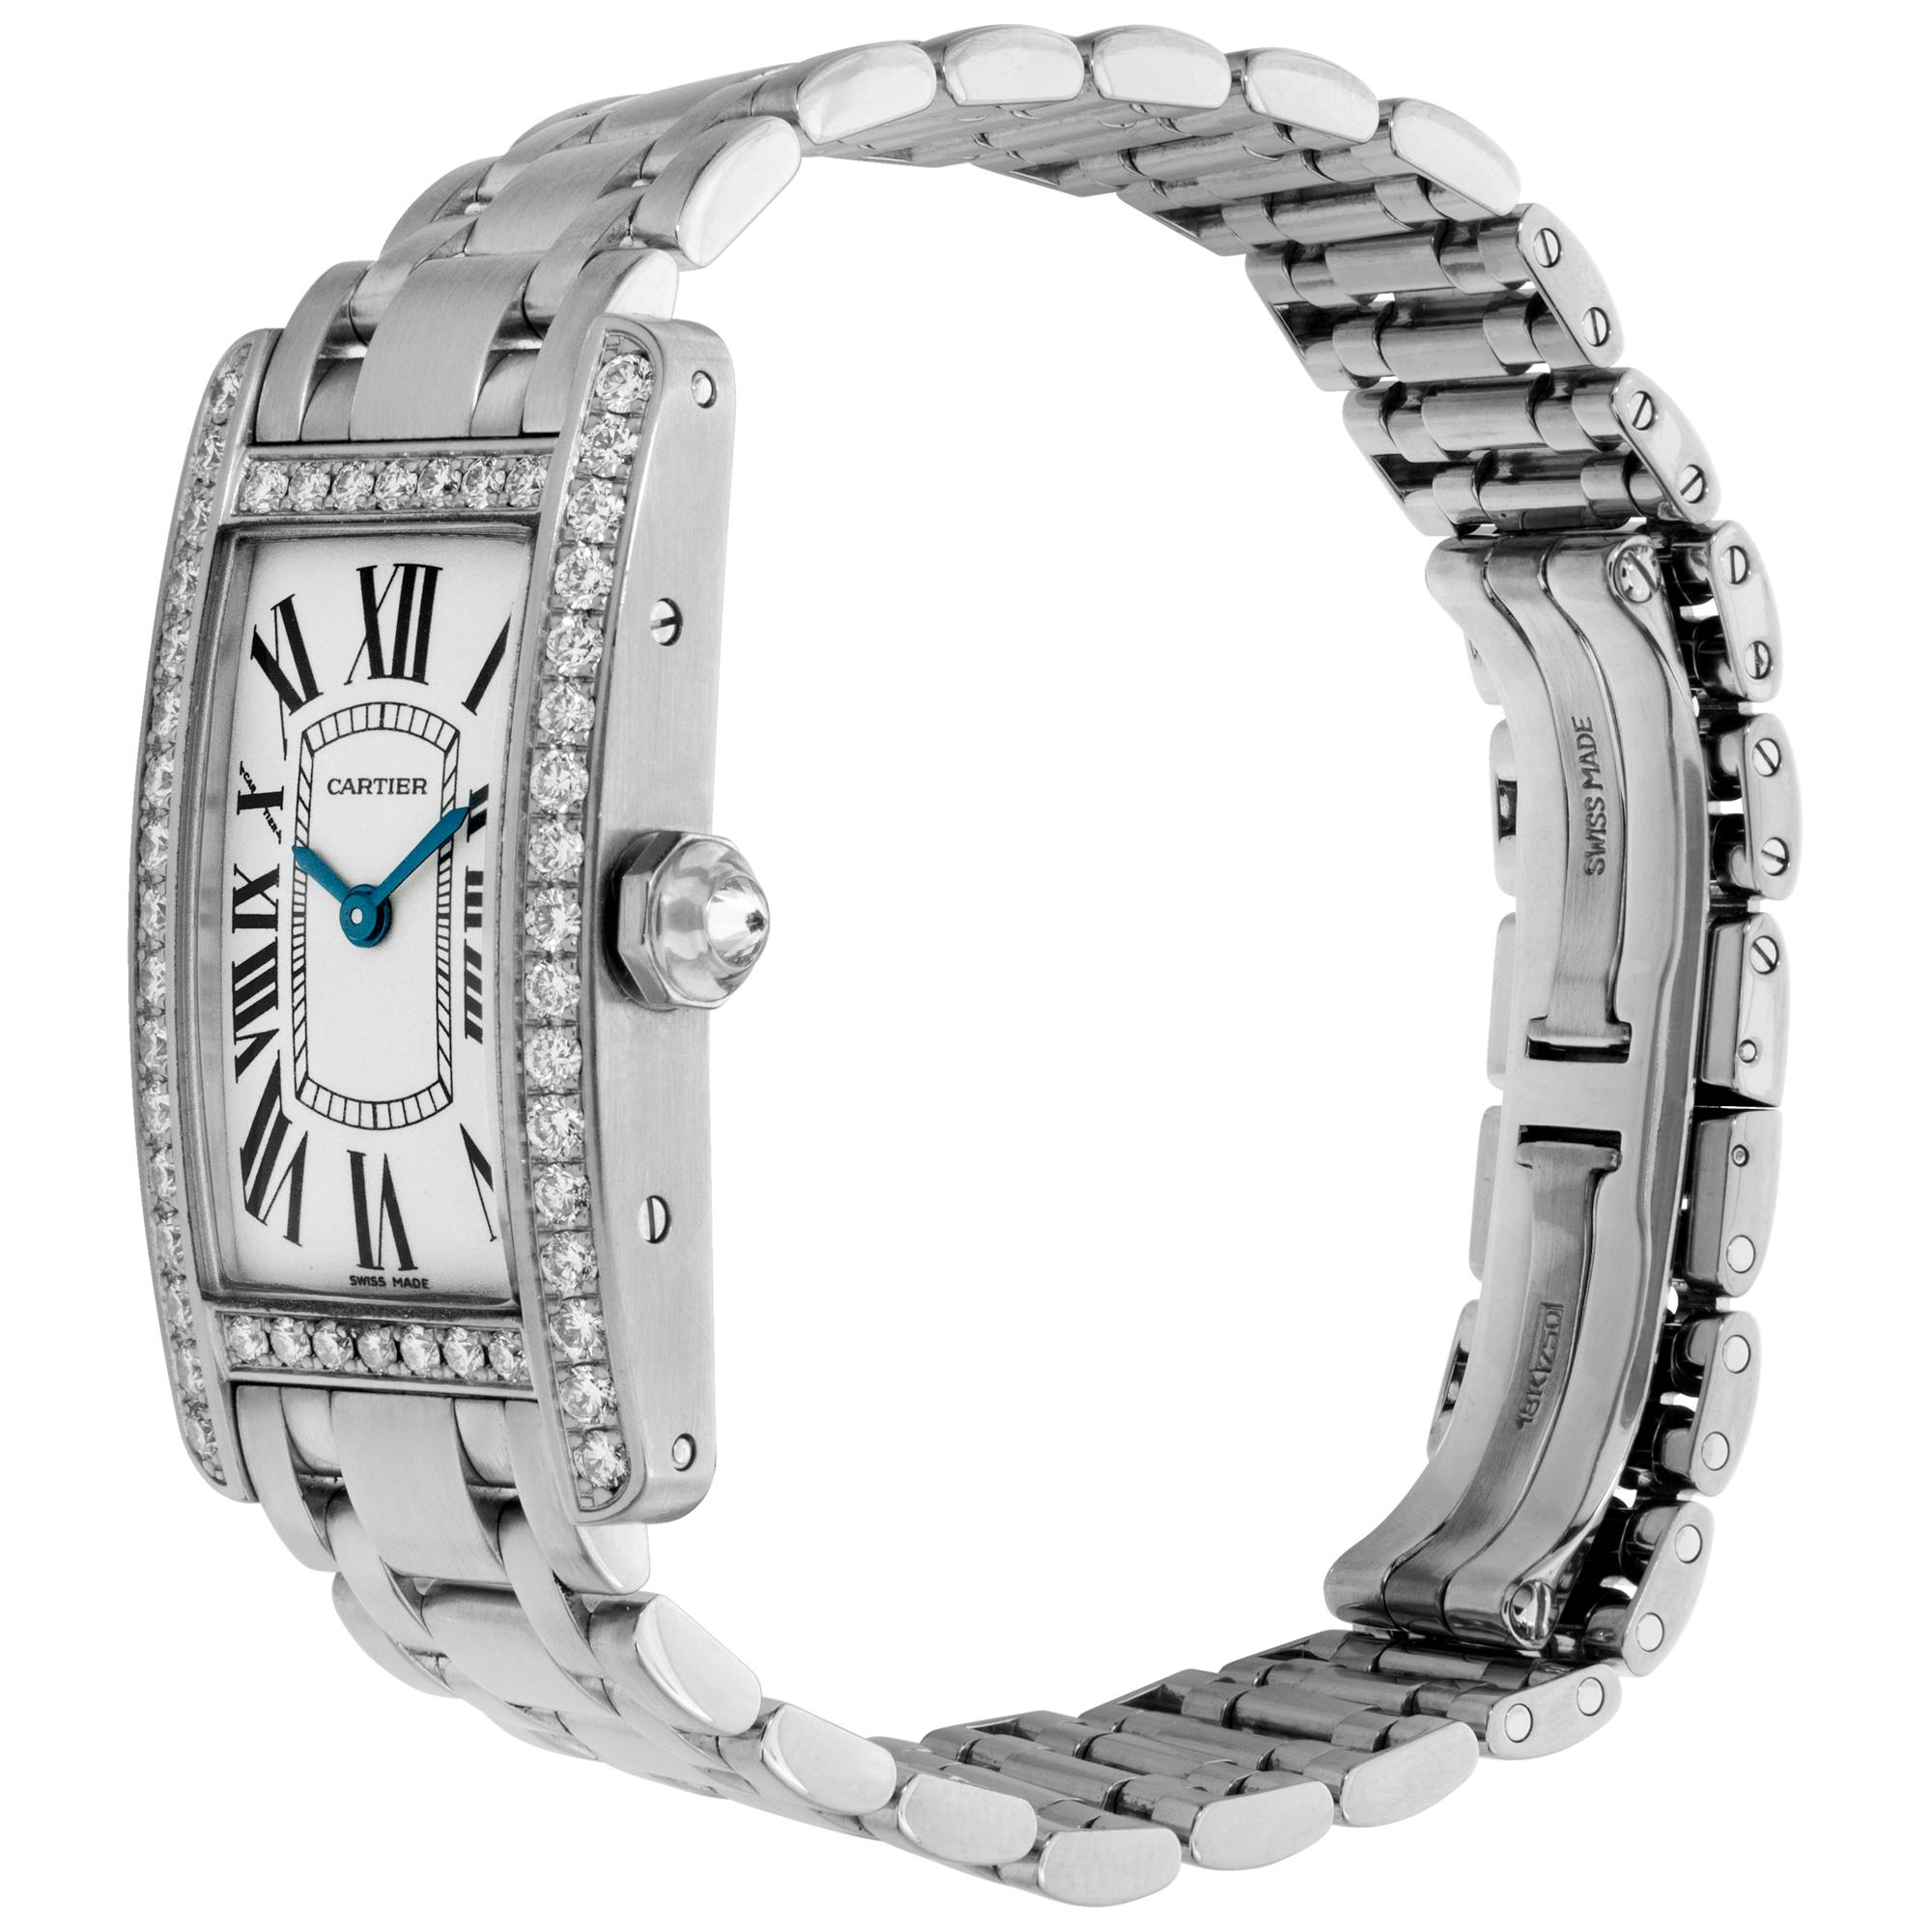 Cartier Tank Americaine in 18k white gold with original diamond bezel and crown on 18k white gold bracelet. Quartz. Measures 35mm long (lug to lug) by 19mm wide. Ref WB7073L1. Circa 2000s. Fine Pre-owned Cartier Watch.

 Certified preowned Dress